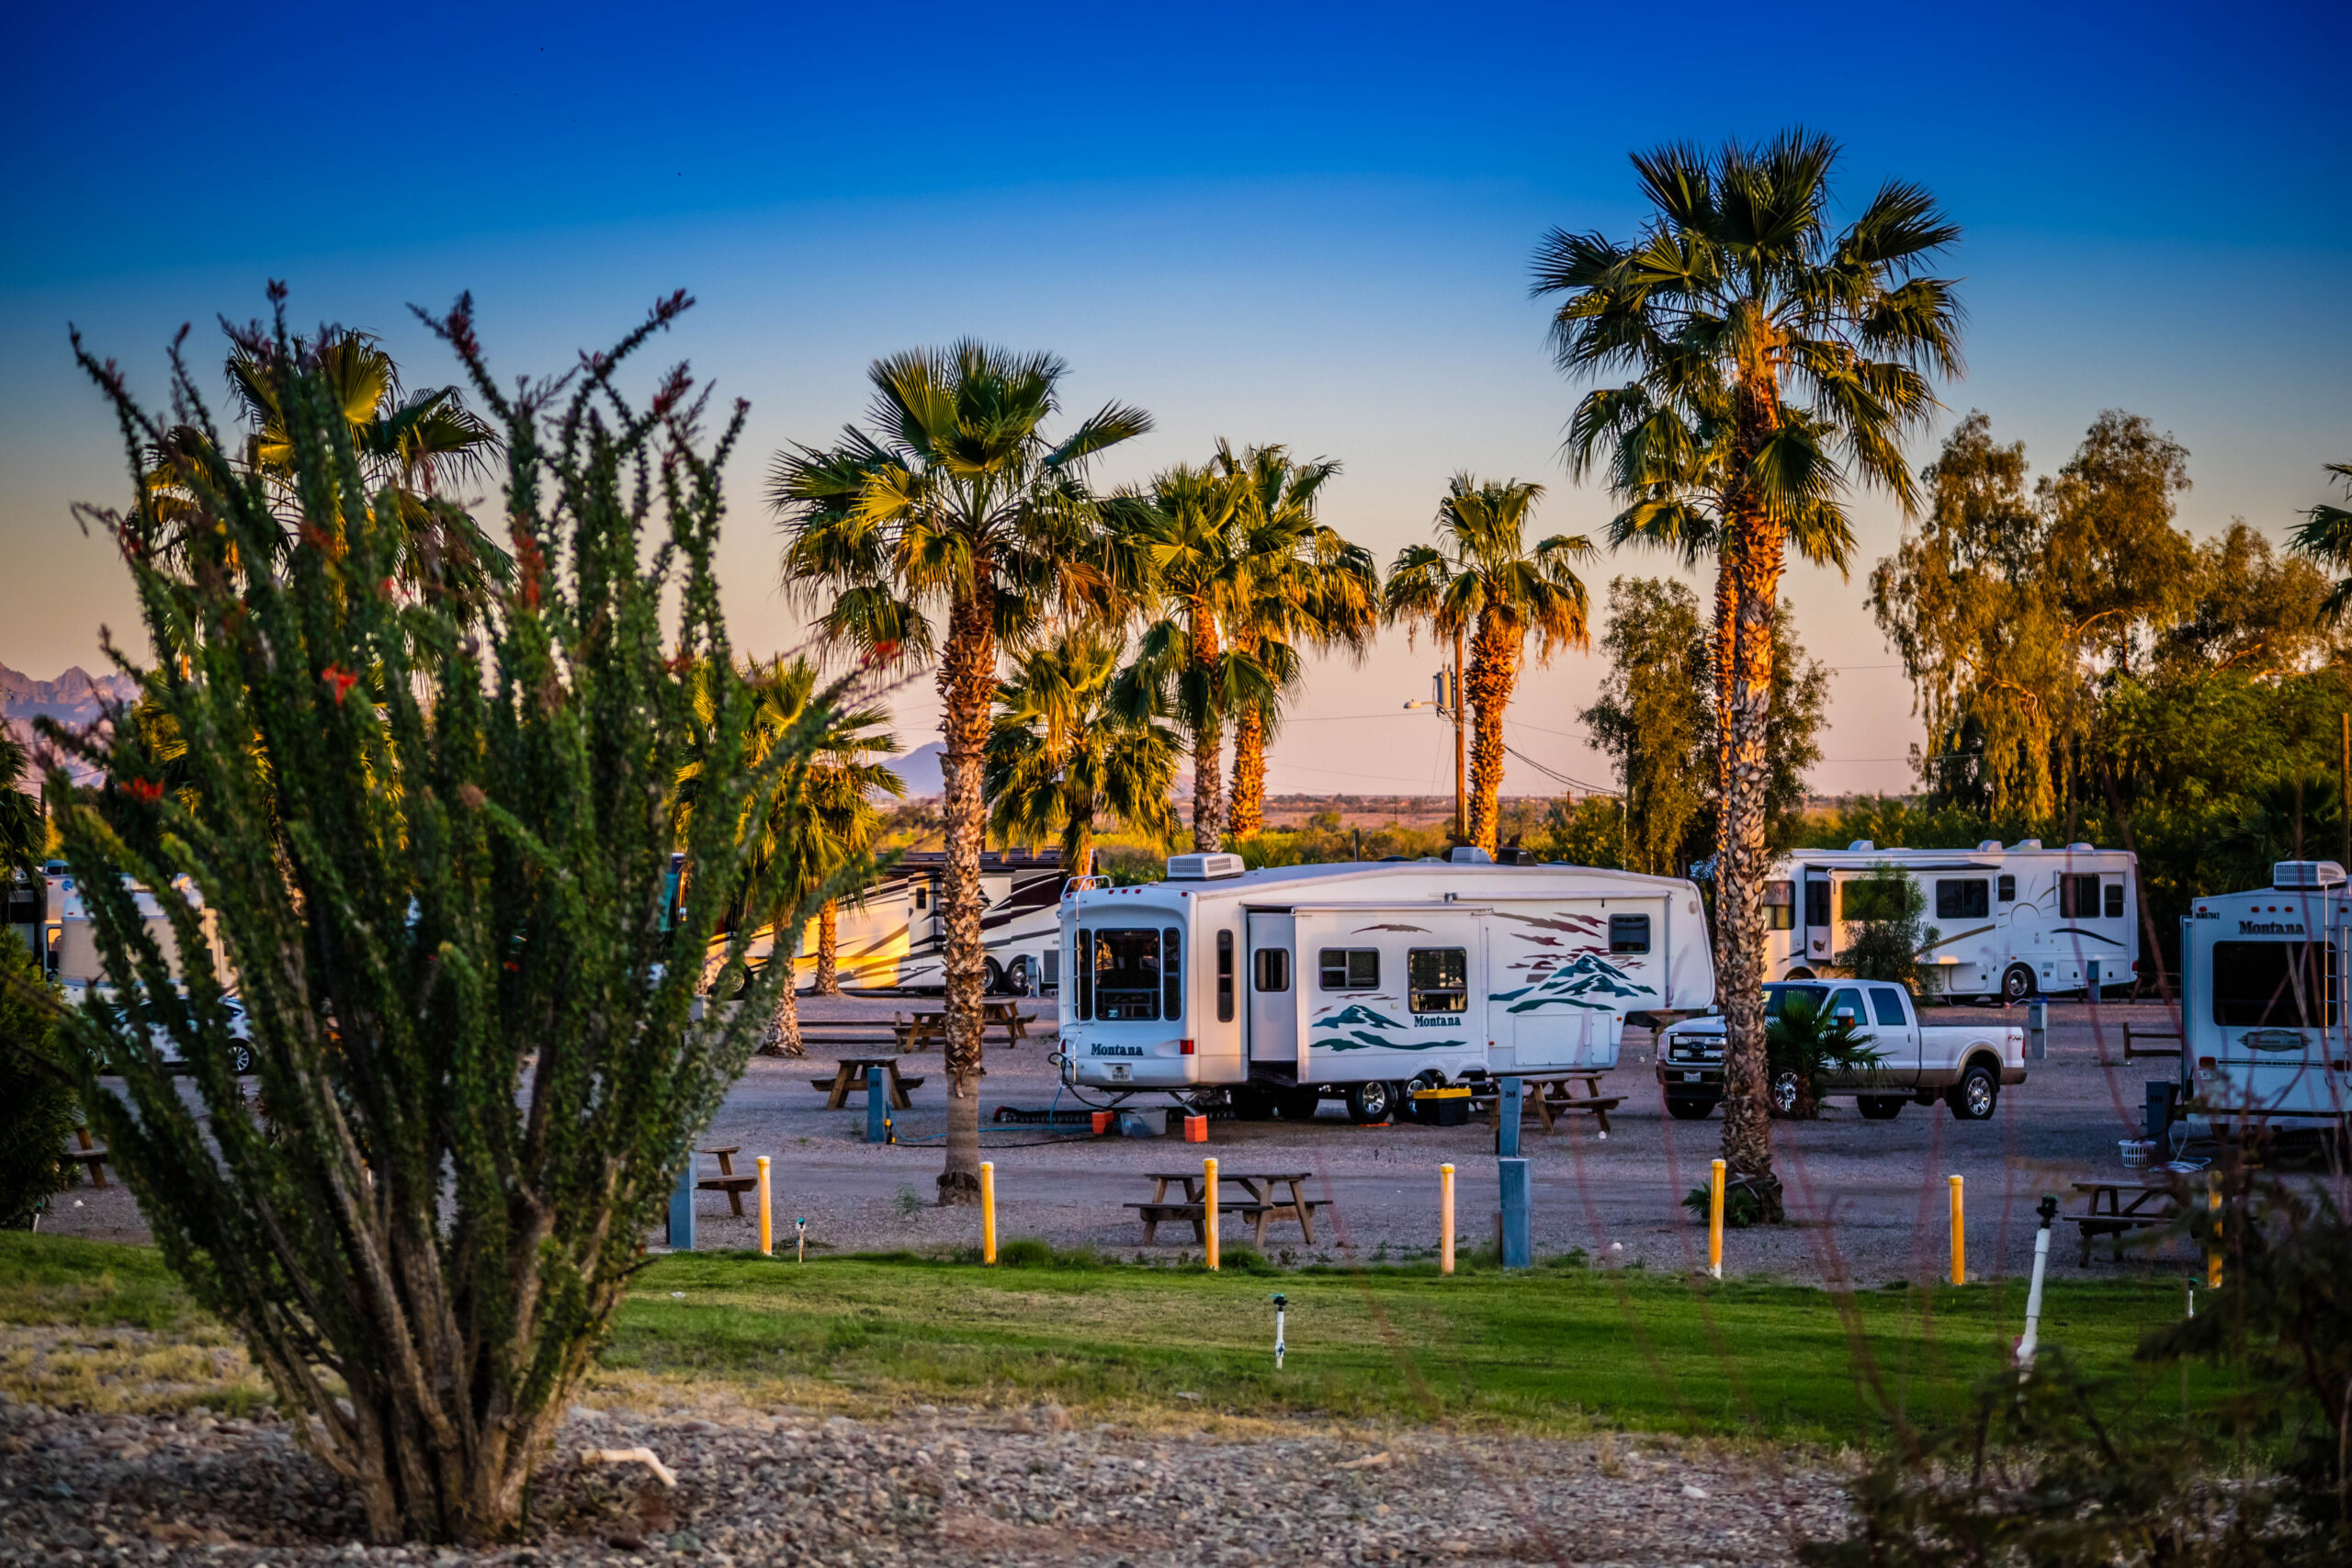 Camping trailers at campsites with palm trees around.